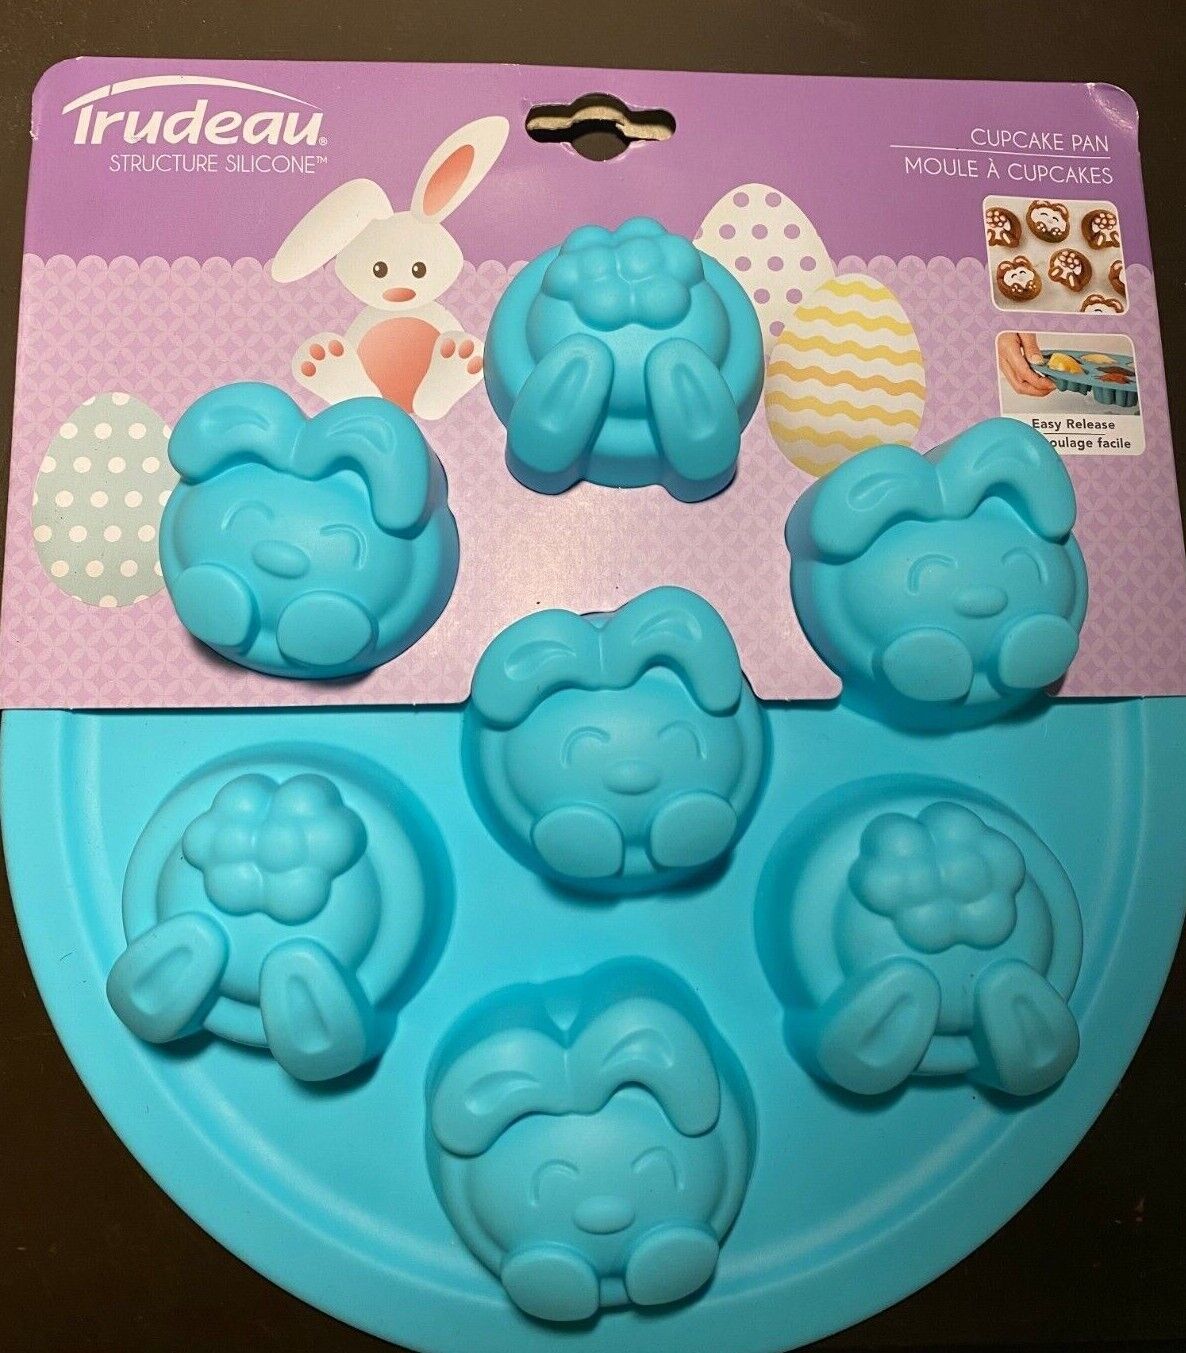 Trudeau Structure Silcone Cupcake Pan Baking Bunnies easy release cooks evenly  - $13.09